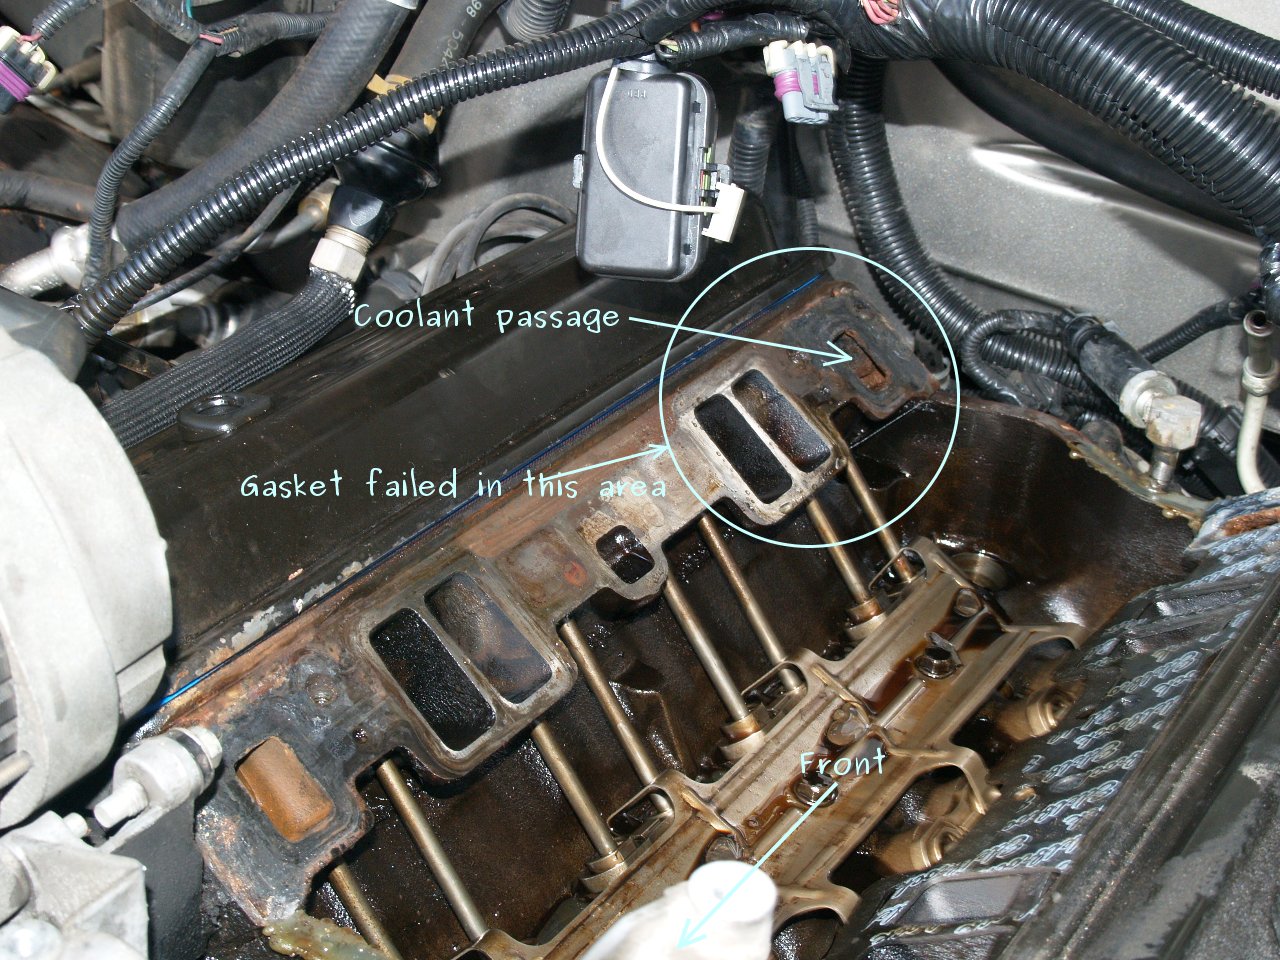 See P0900 in engine